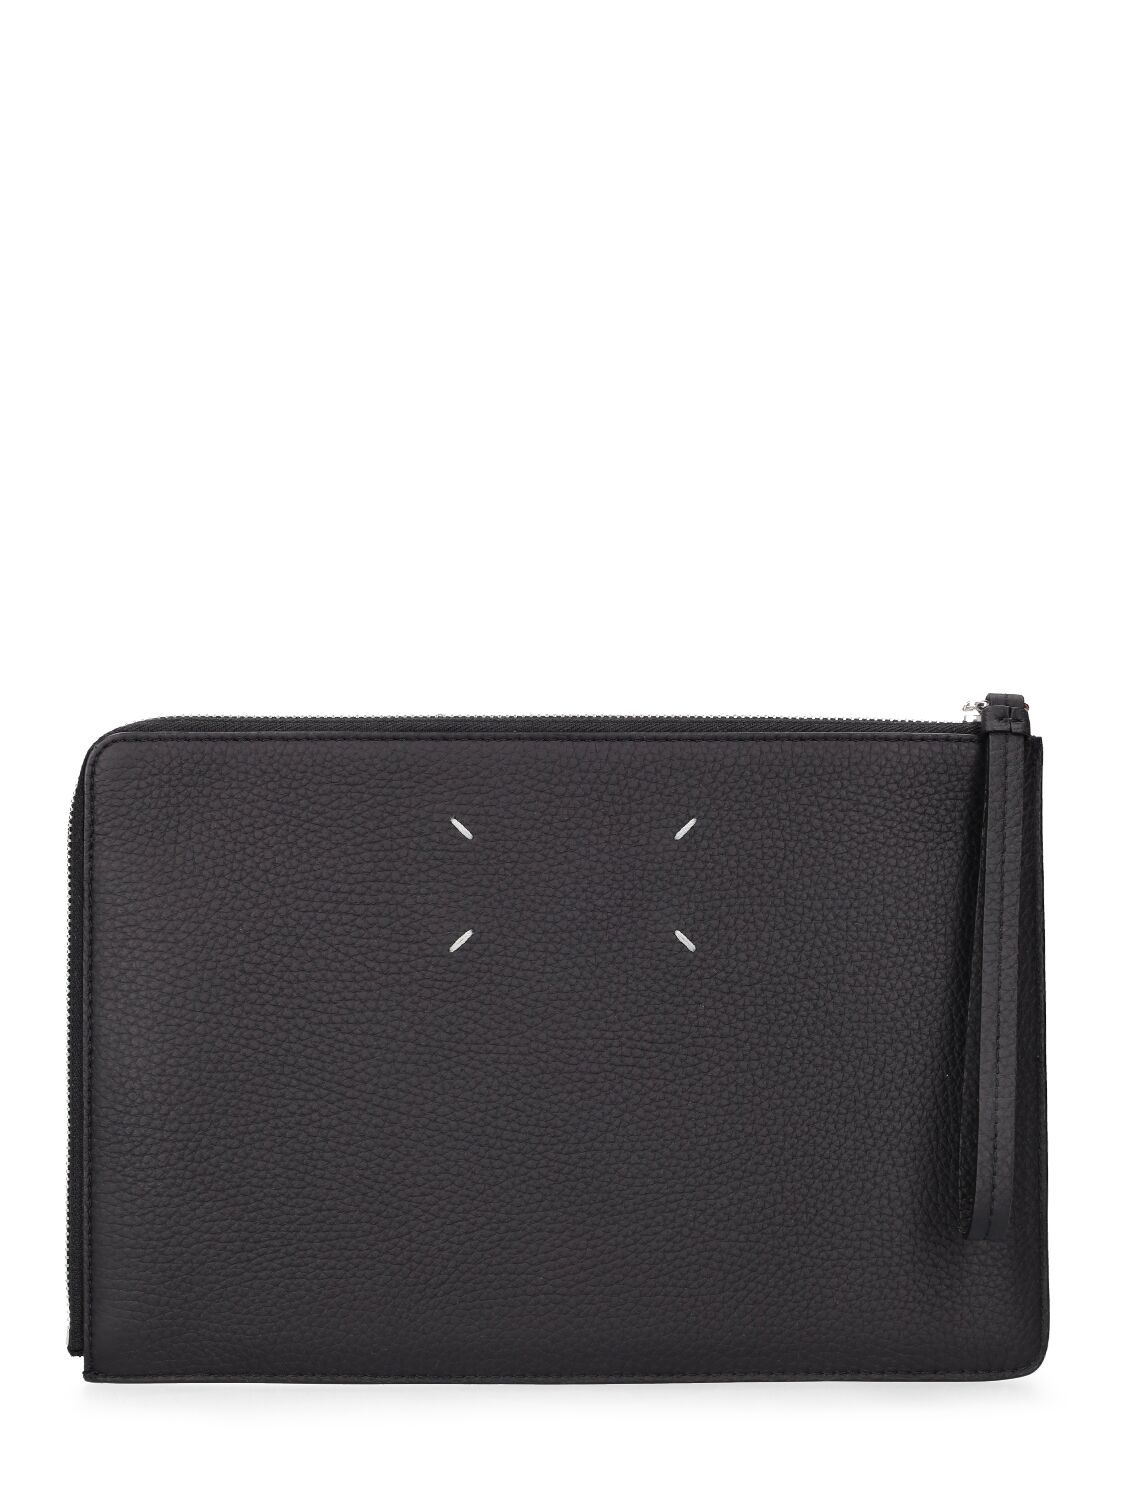 Image of Large Leather Zip Pouch